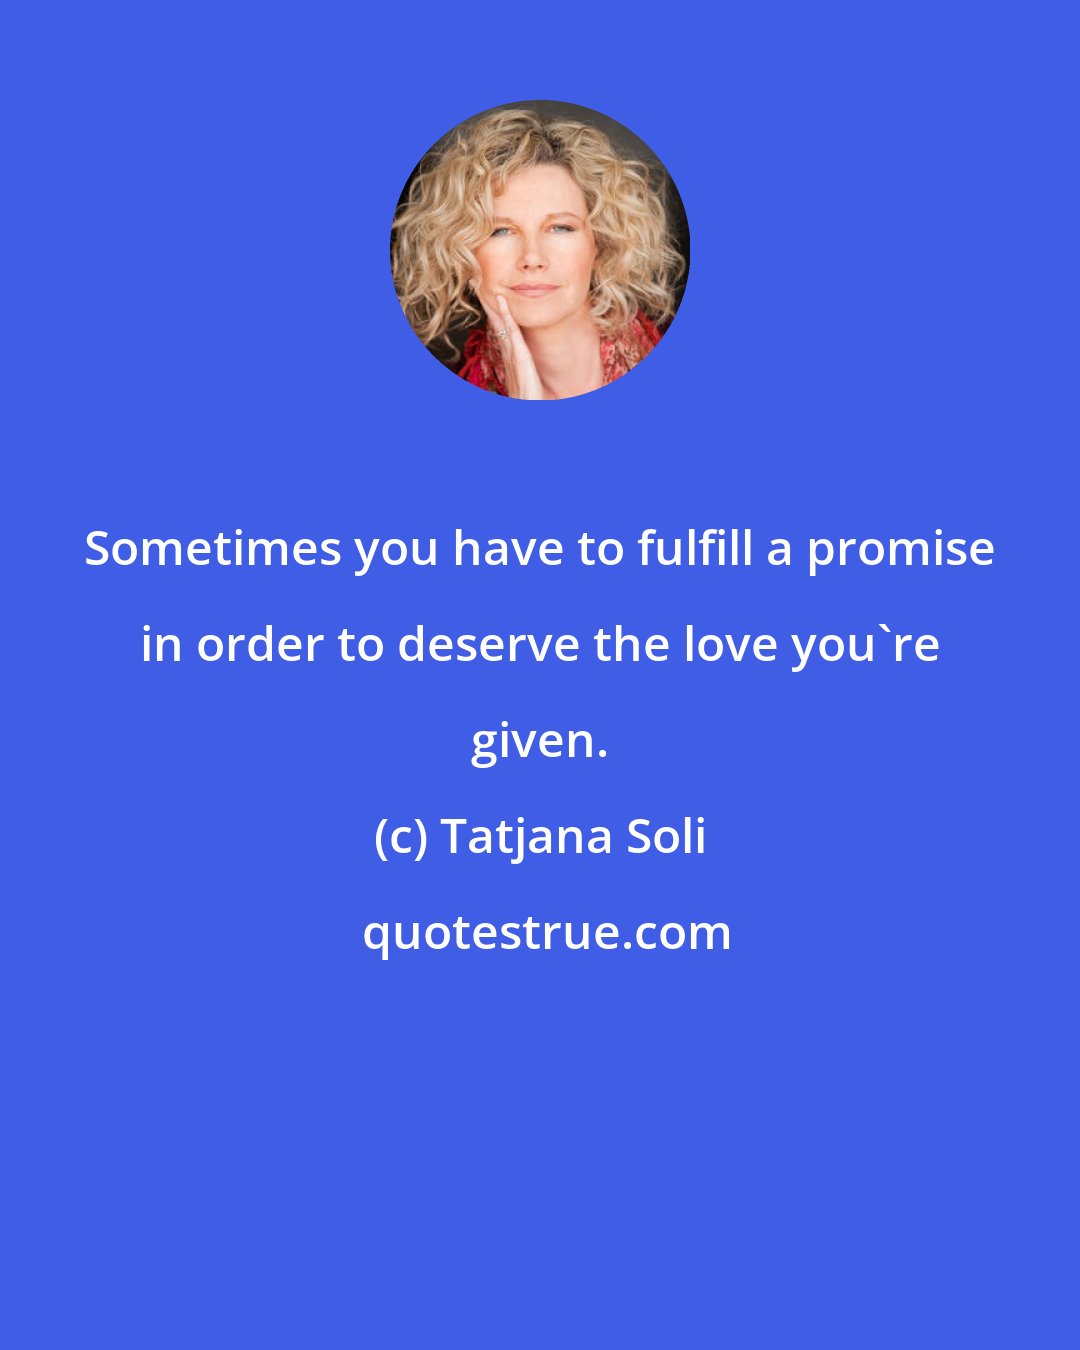 Tatjana Soli: Sometimes you have to fulfill a promise in order to deserve the love you're given.